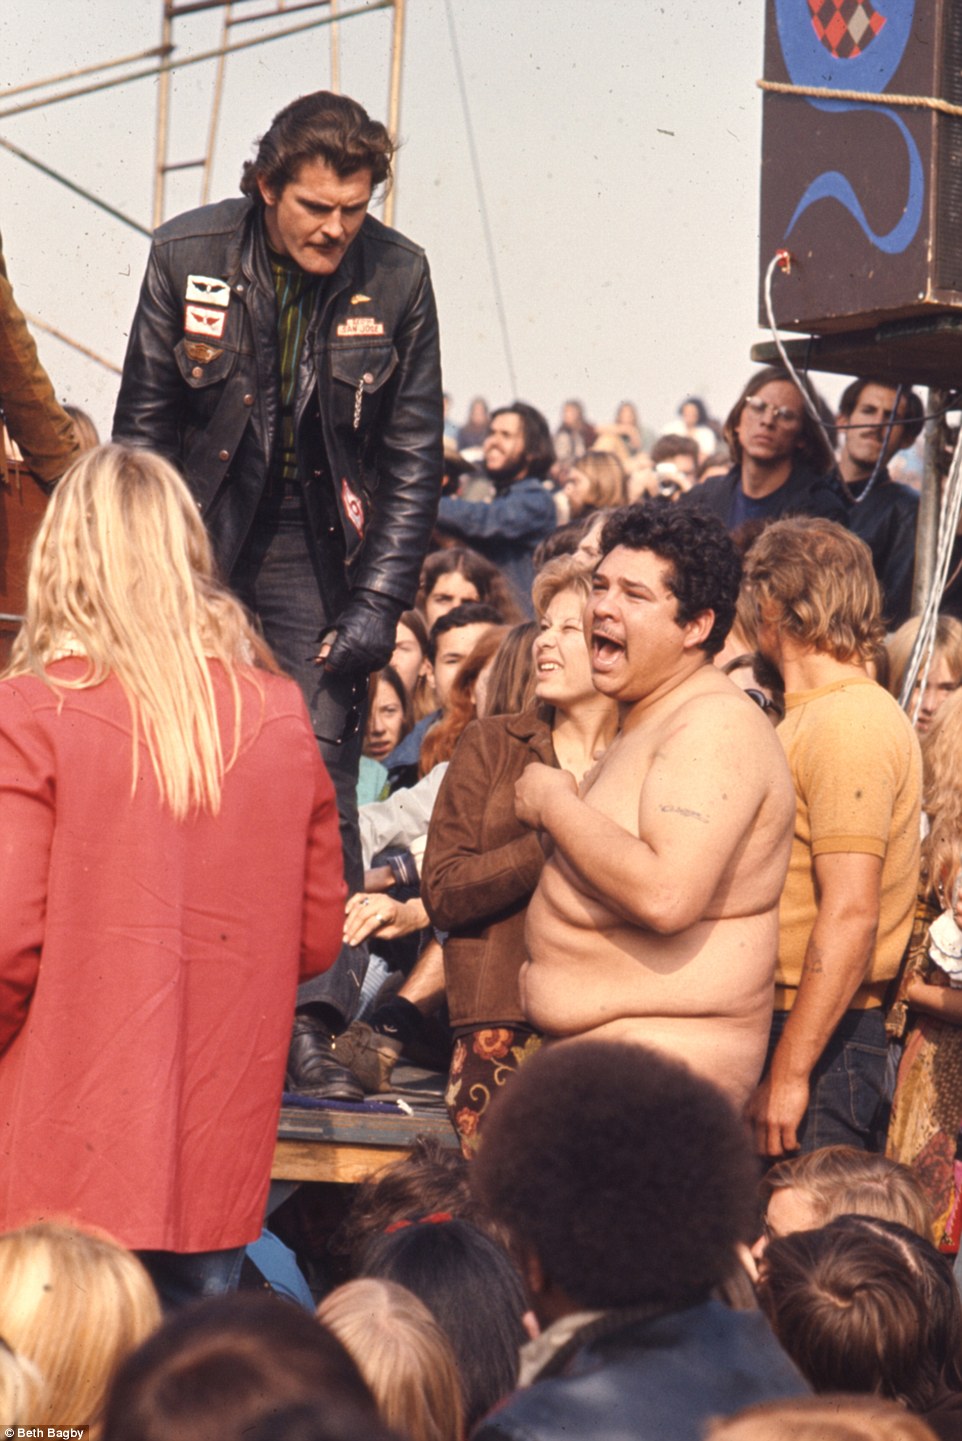 THE FAMOUS NAKED CHICANO OF ALTAMONT.jpg